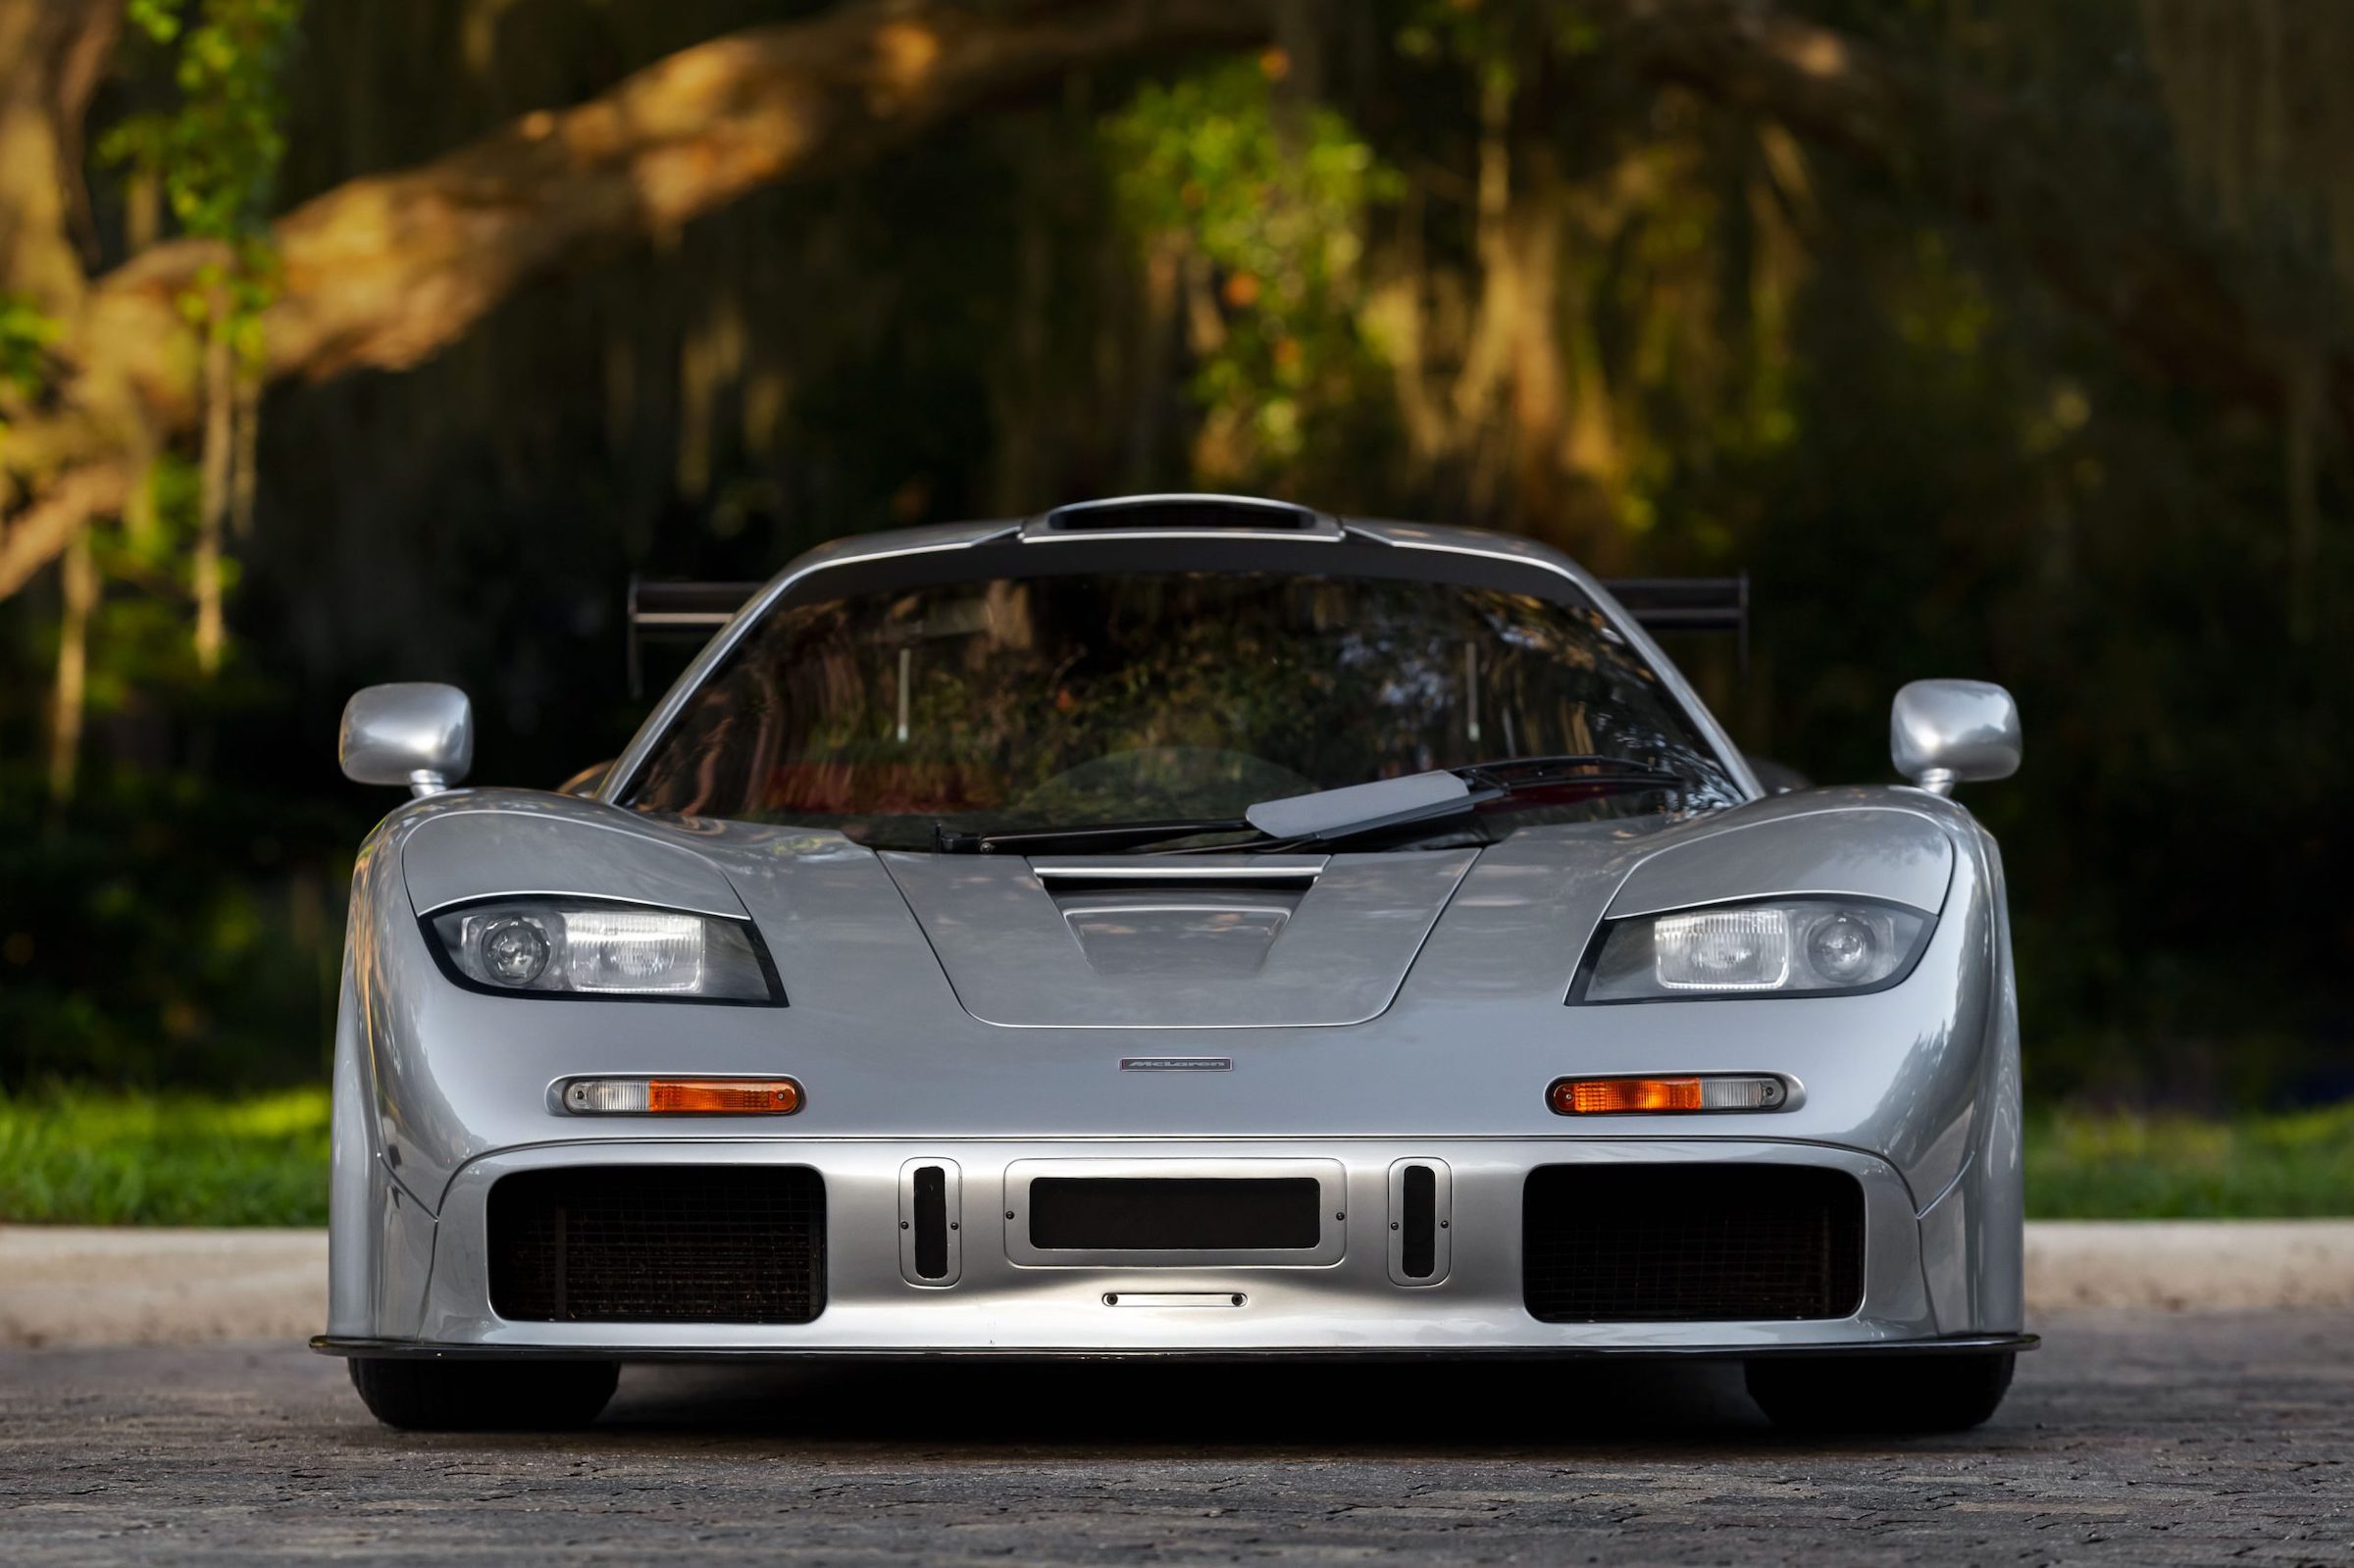 This unique McLaren F1 borrowed more than a V12 from BMW